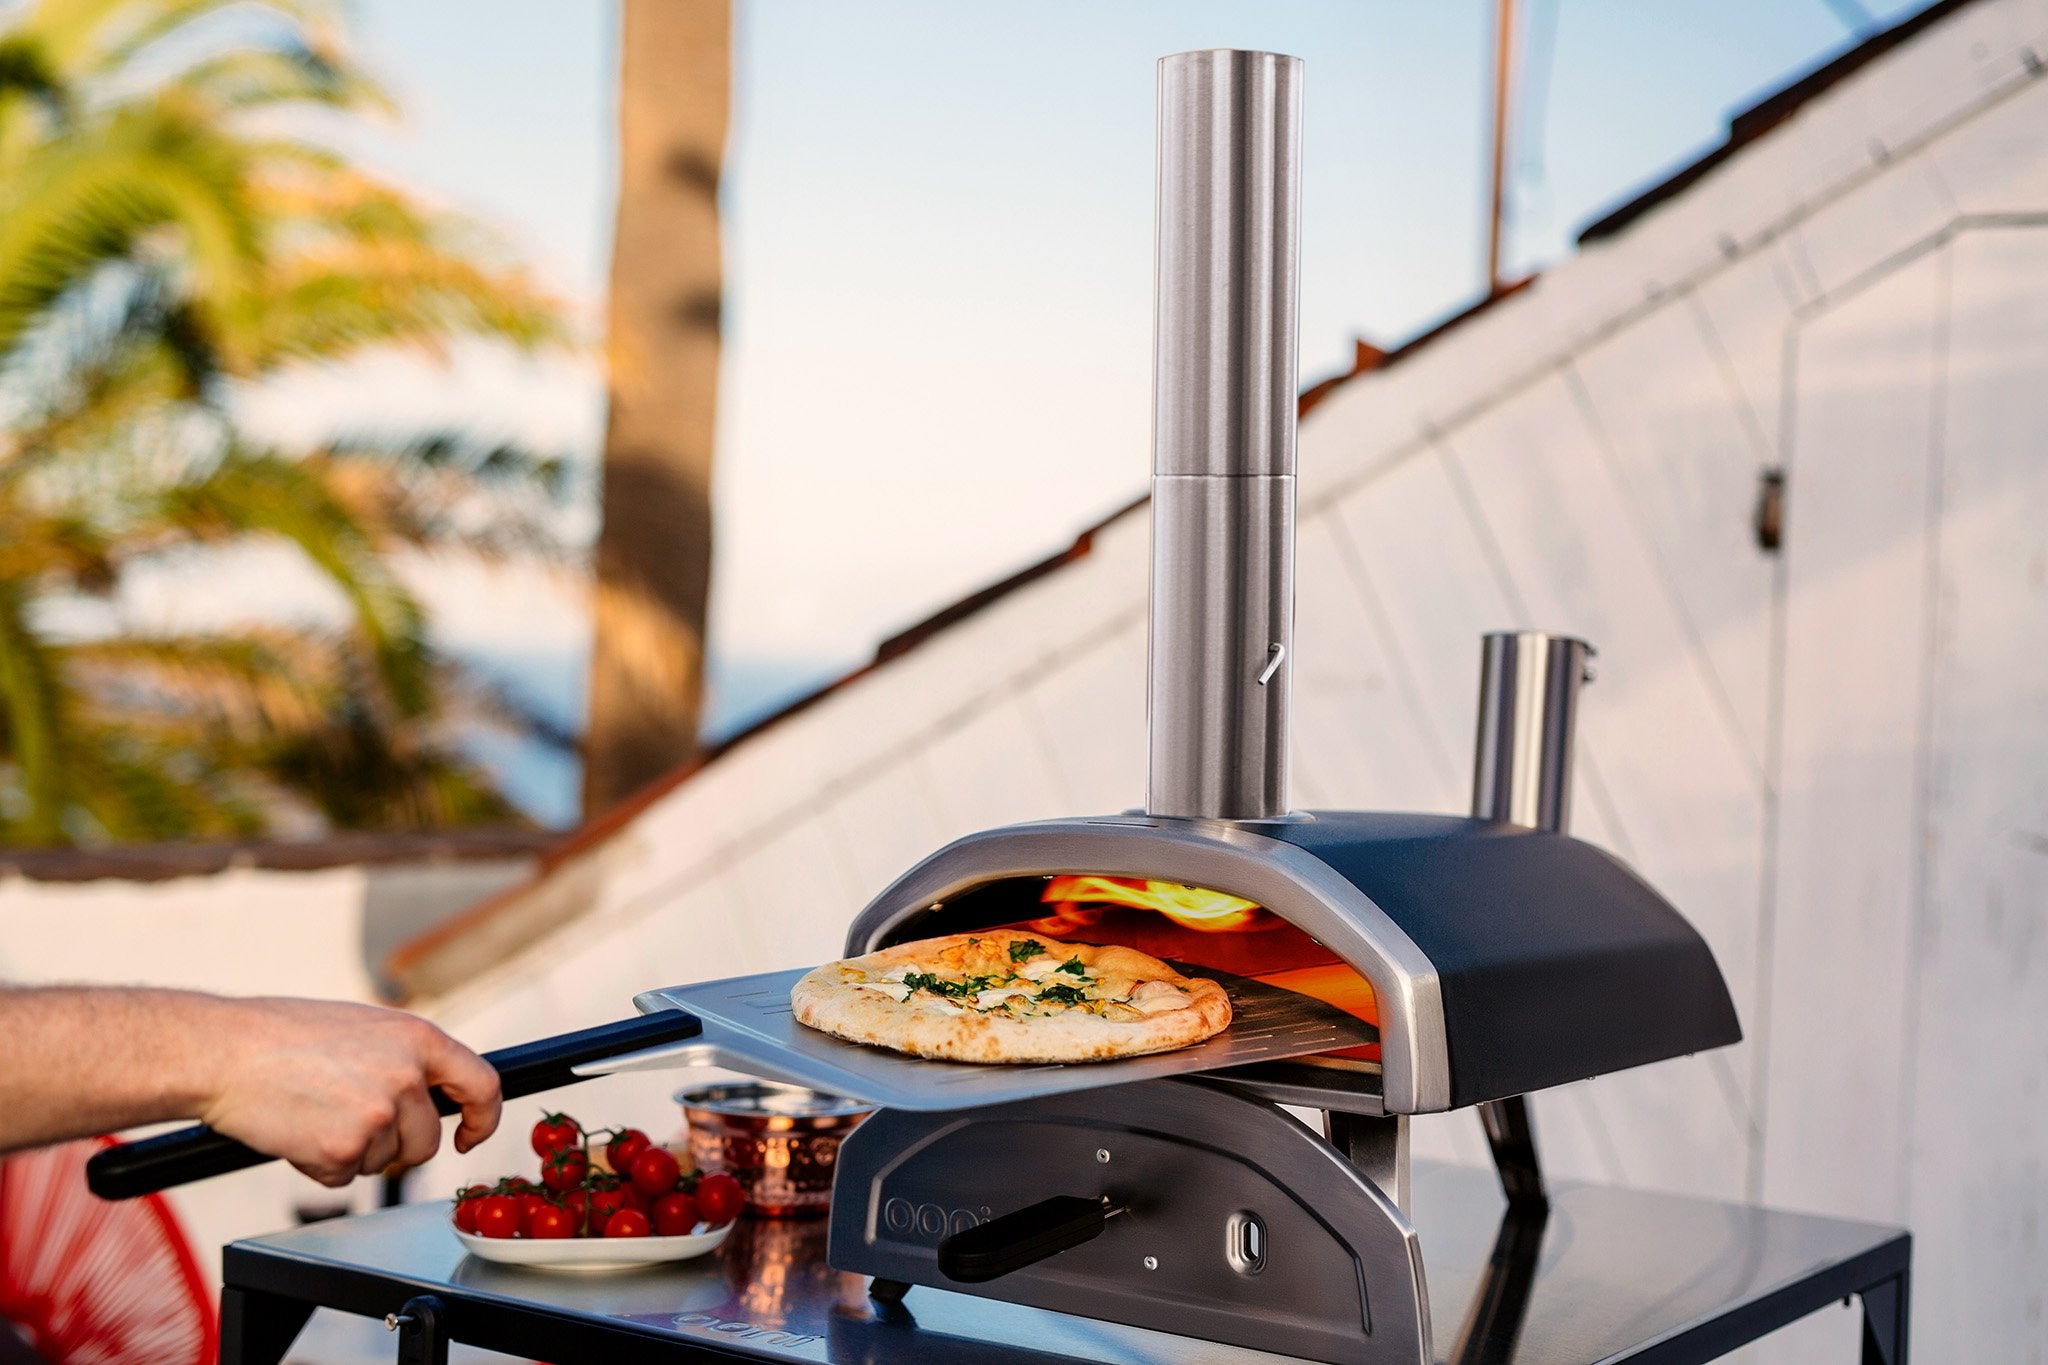 Ooni’s 12-inch pizza ovens are 20 percent off for Labor Day